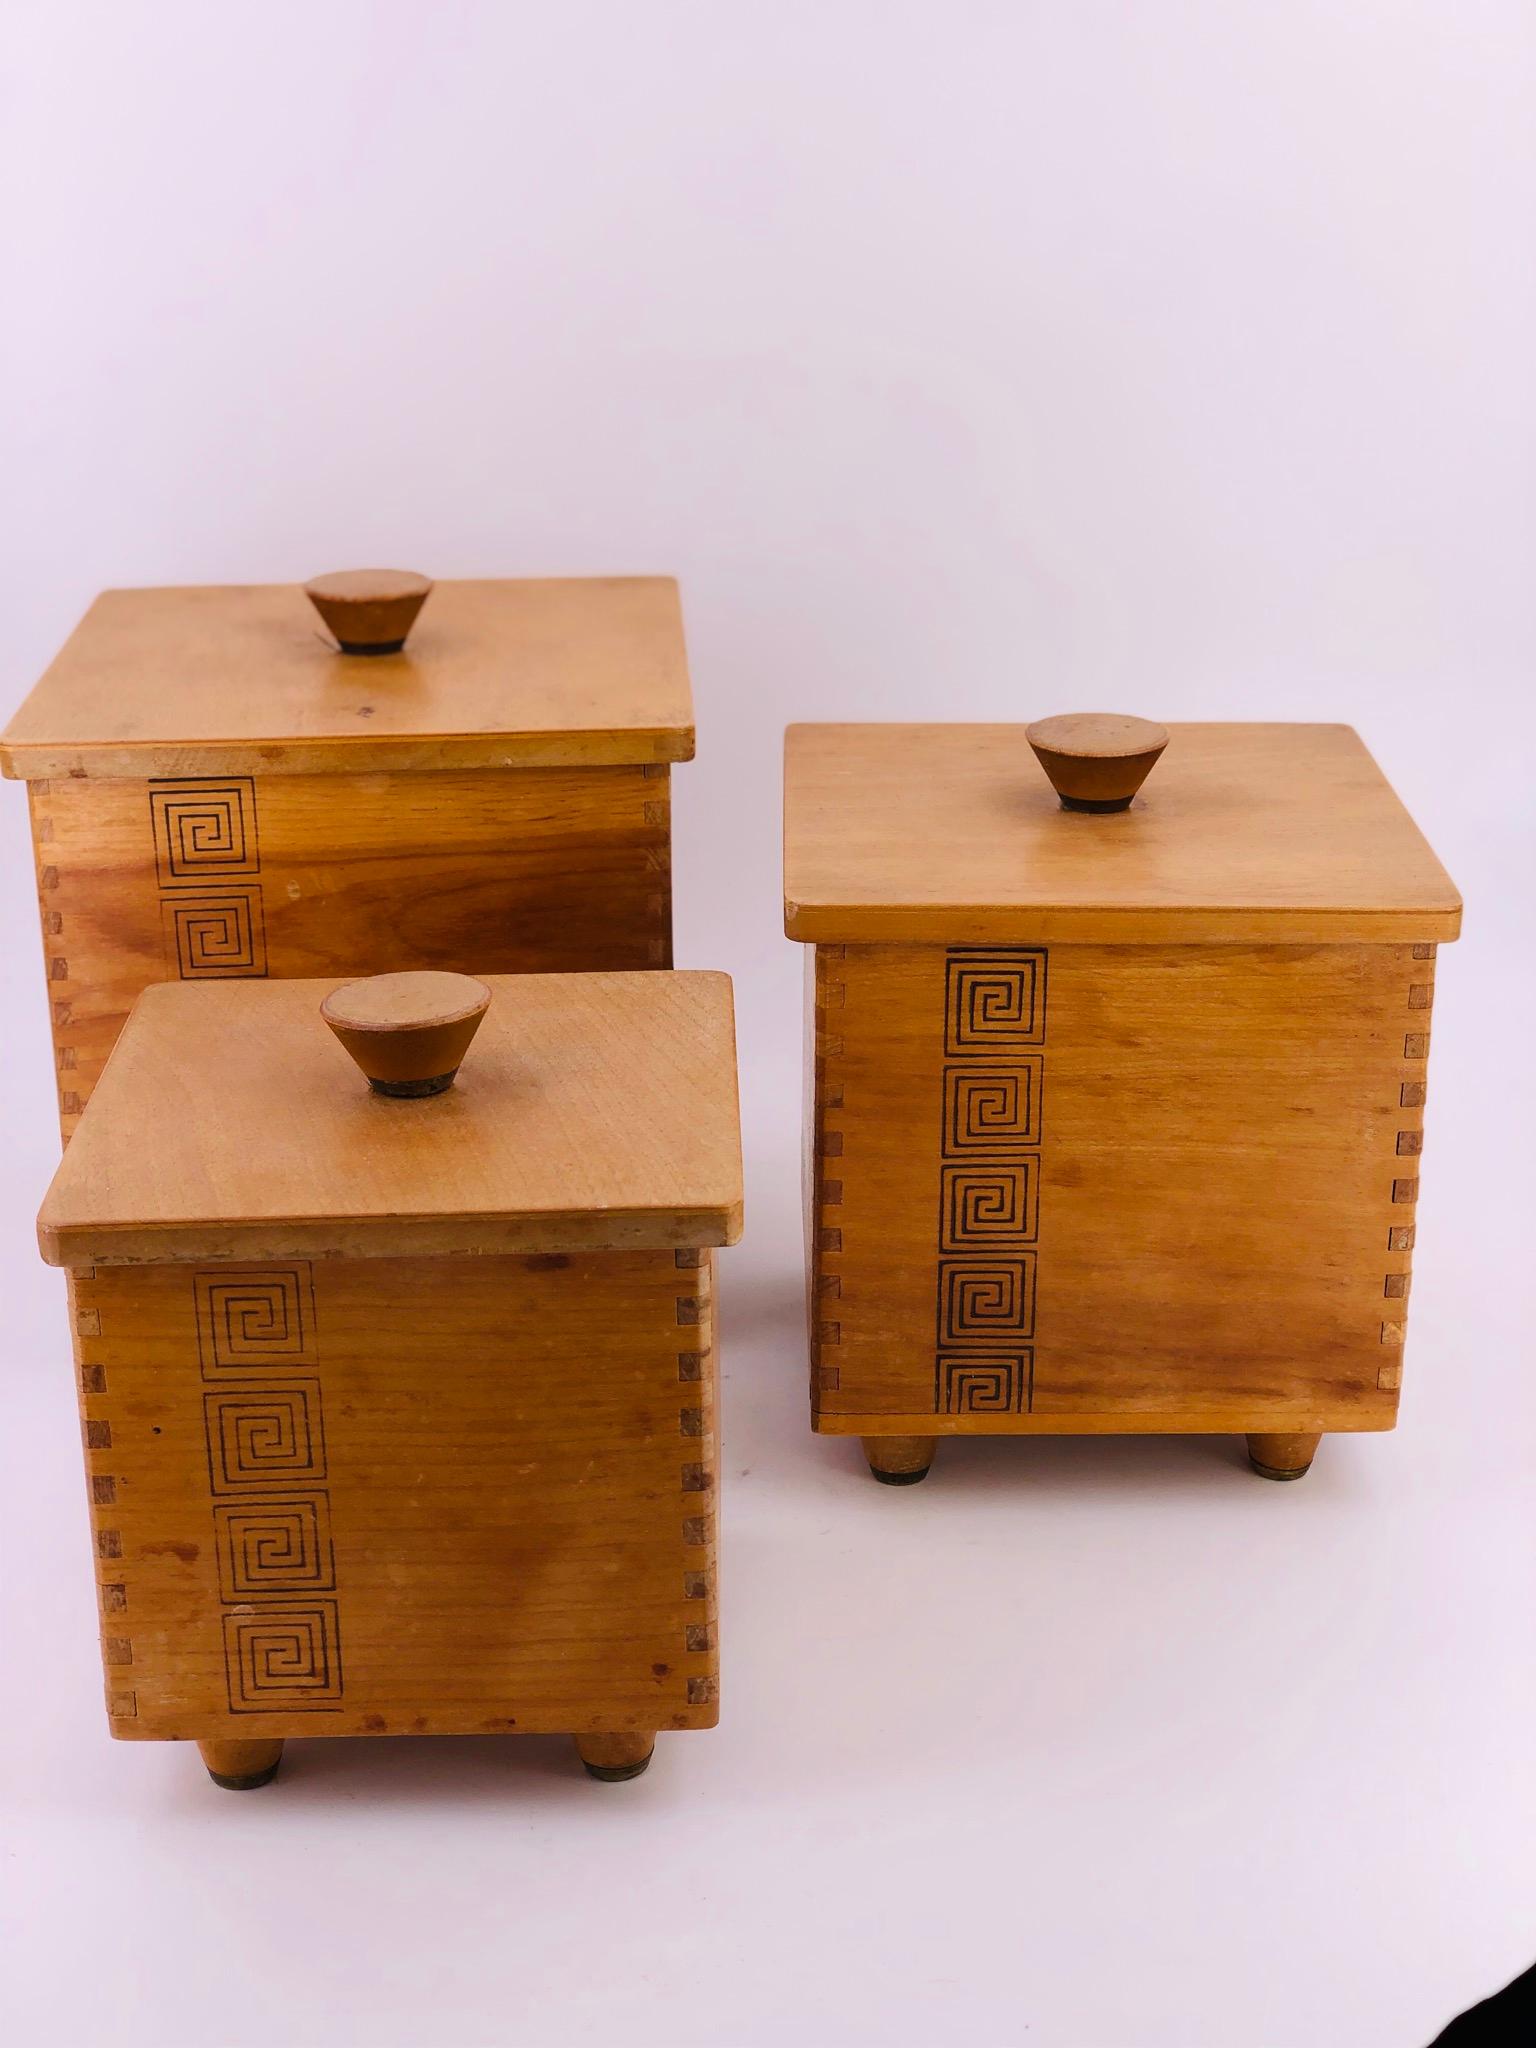 Nice set of 3 solid wood vintage boxes, handmade in Japan 1959 by Woodpecker woodware, dovetail and cool small feet with brass tips, perfect for the kitchen. Nice design on front. in 3 sizes.